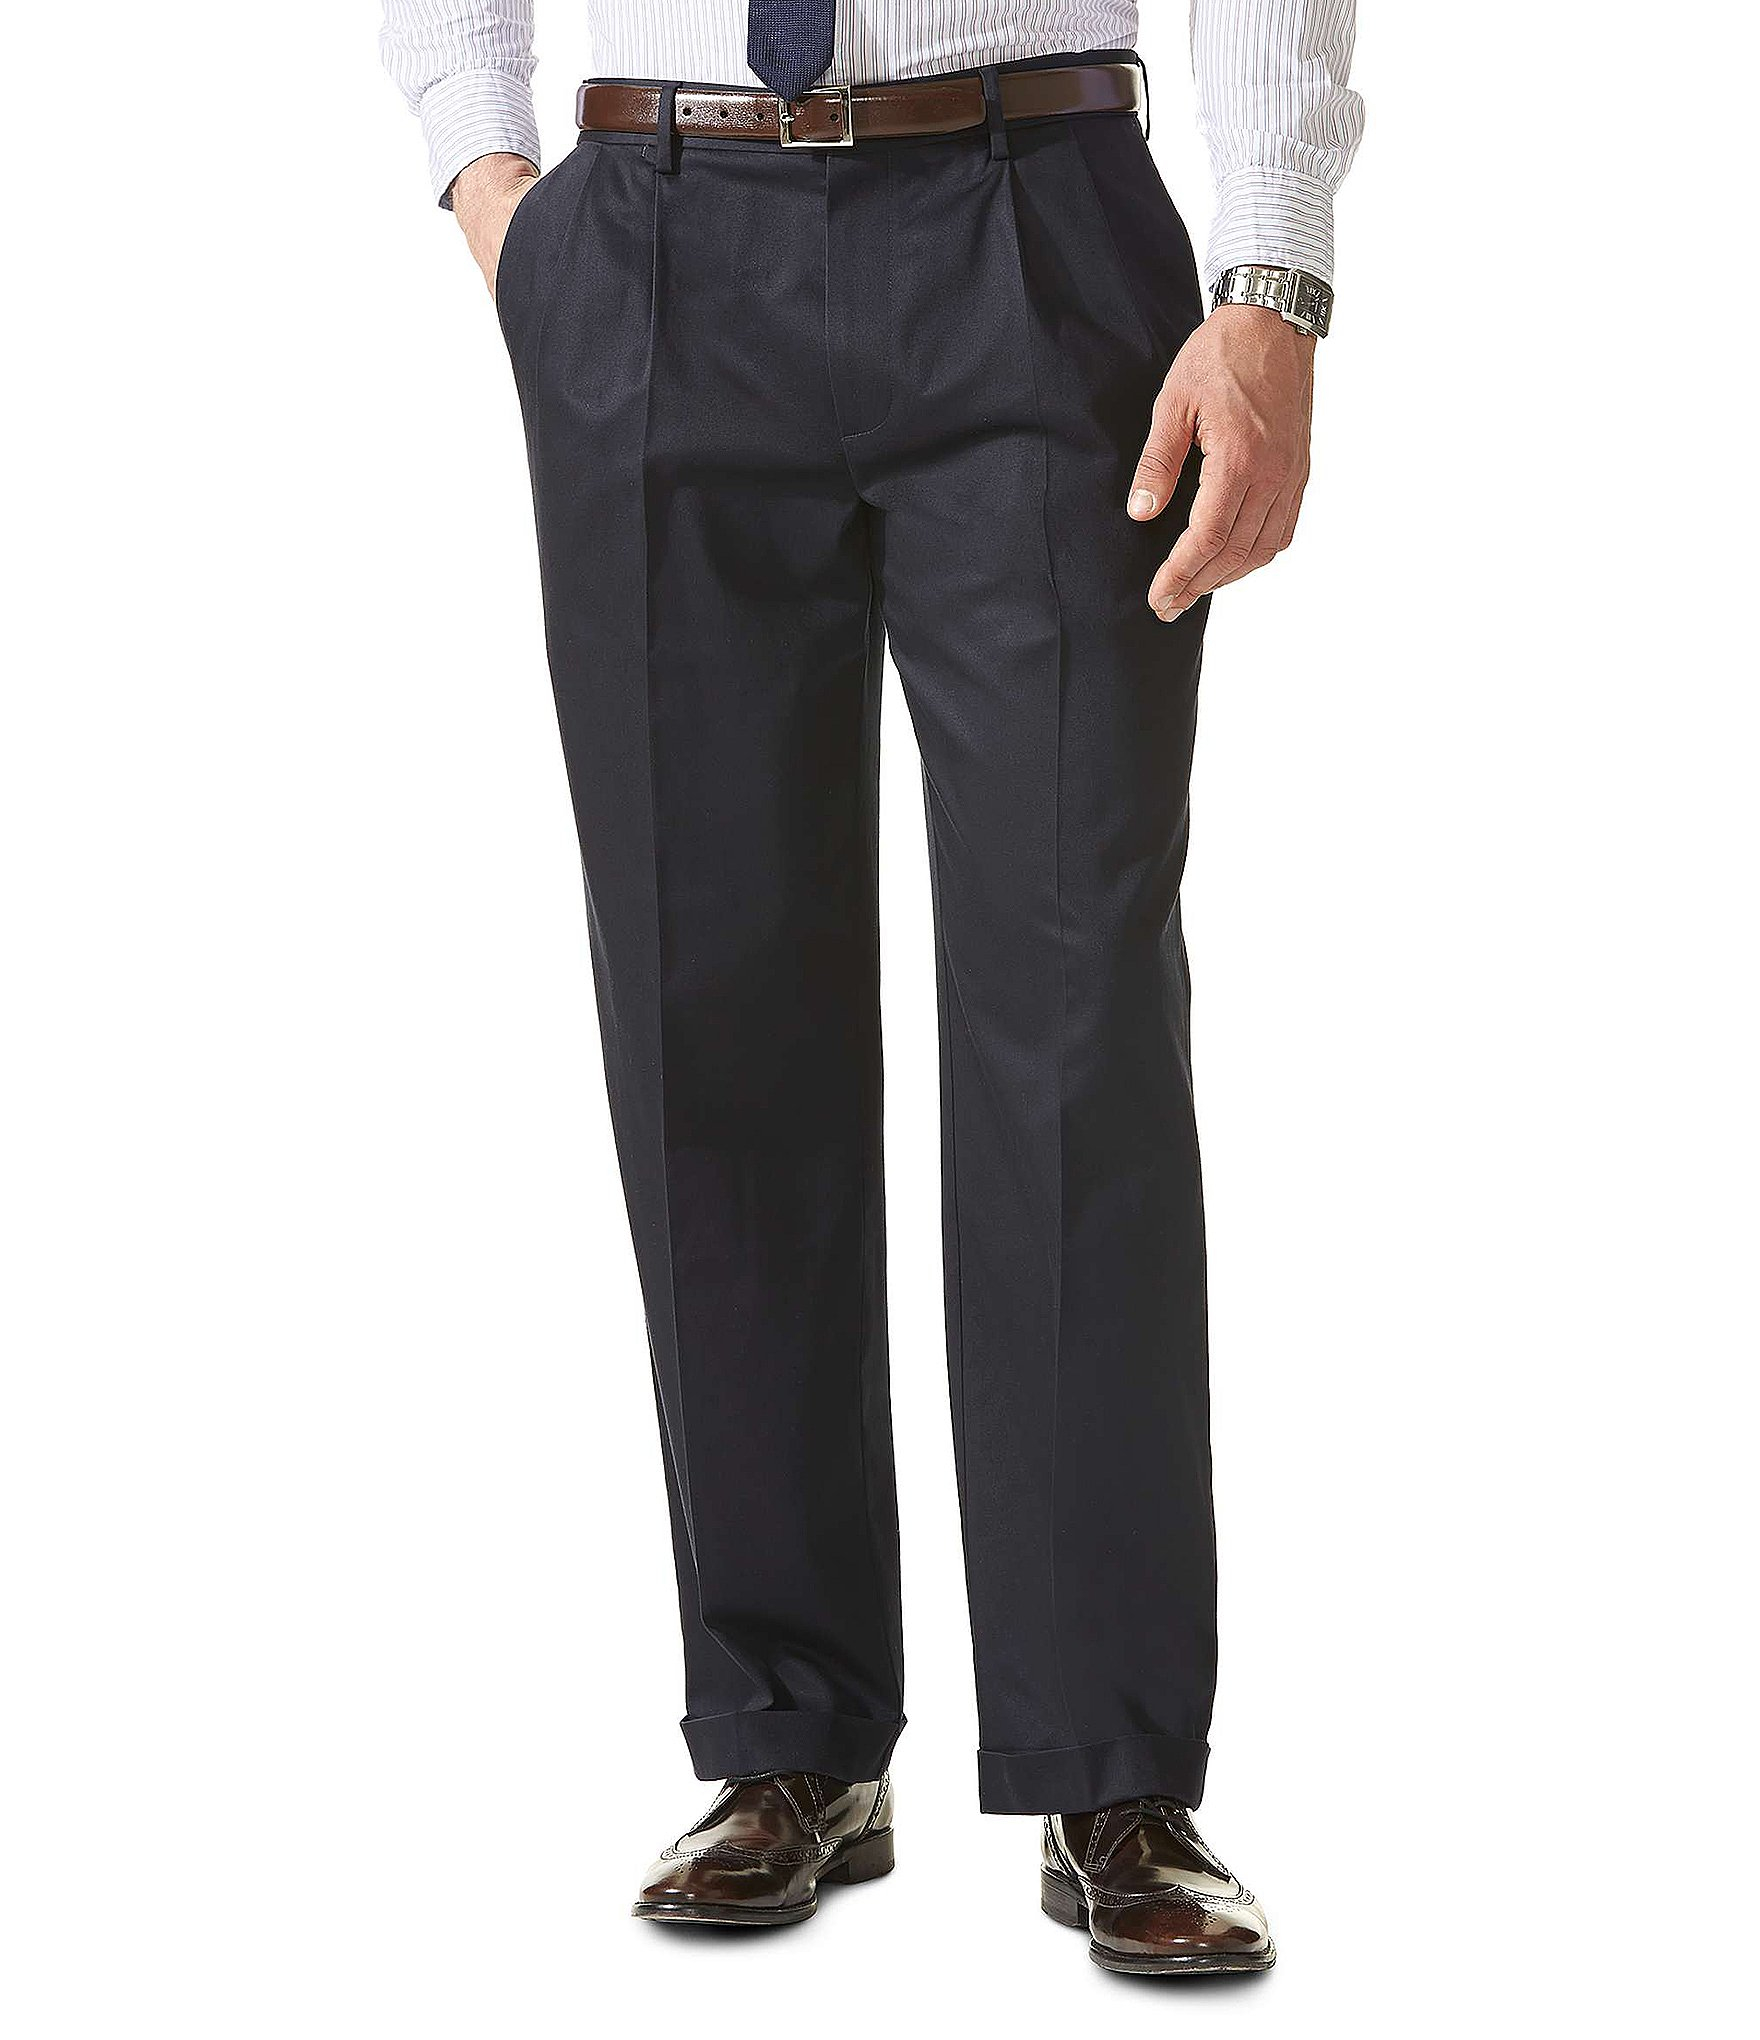 Lyst - Dockers Insignia Pleated Classic Fit Never-iron Pants in Black ...